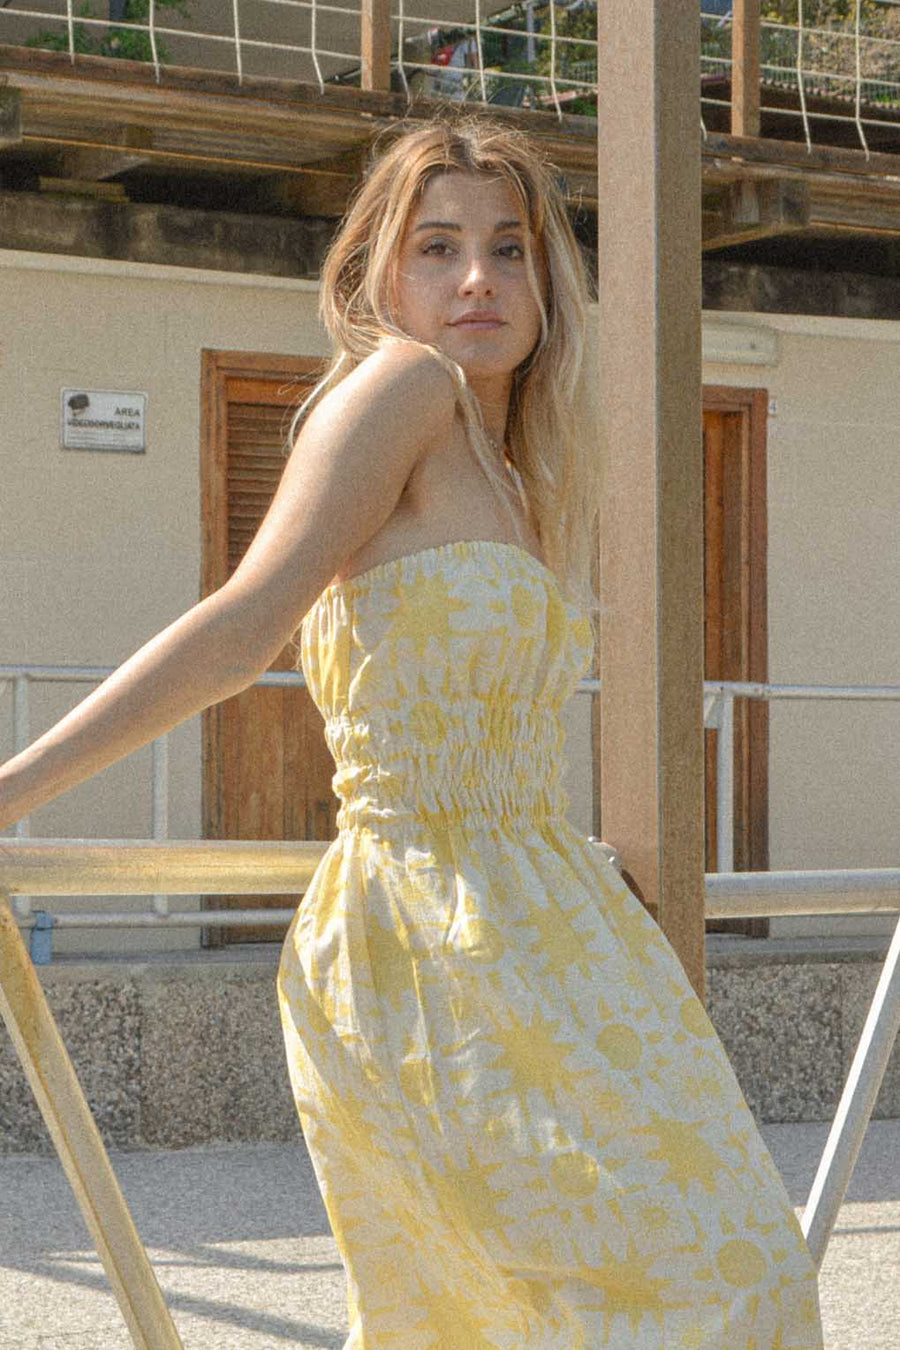 il Sole Ruched Dress